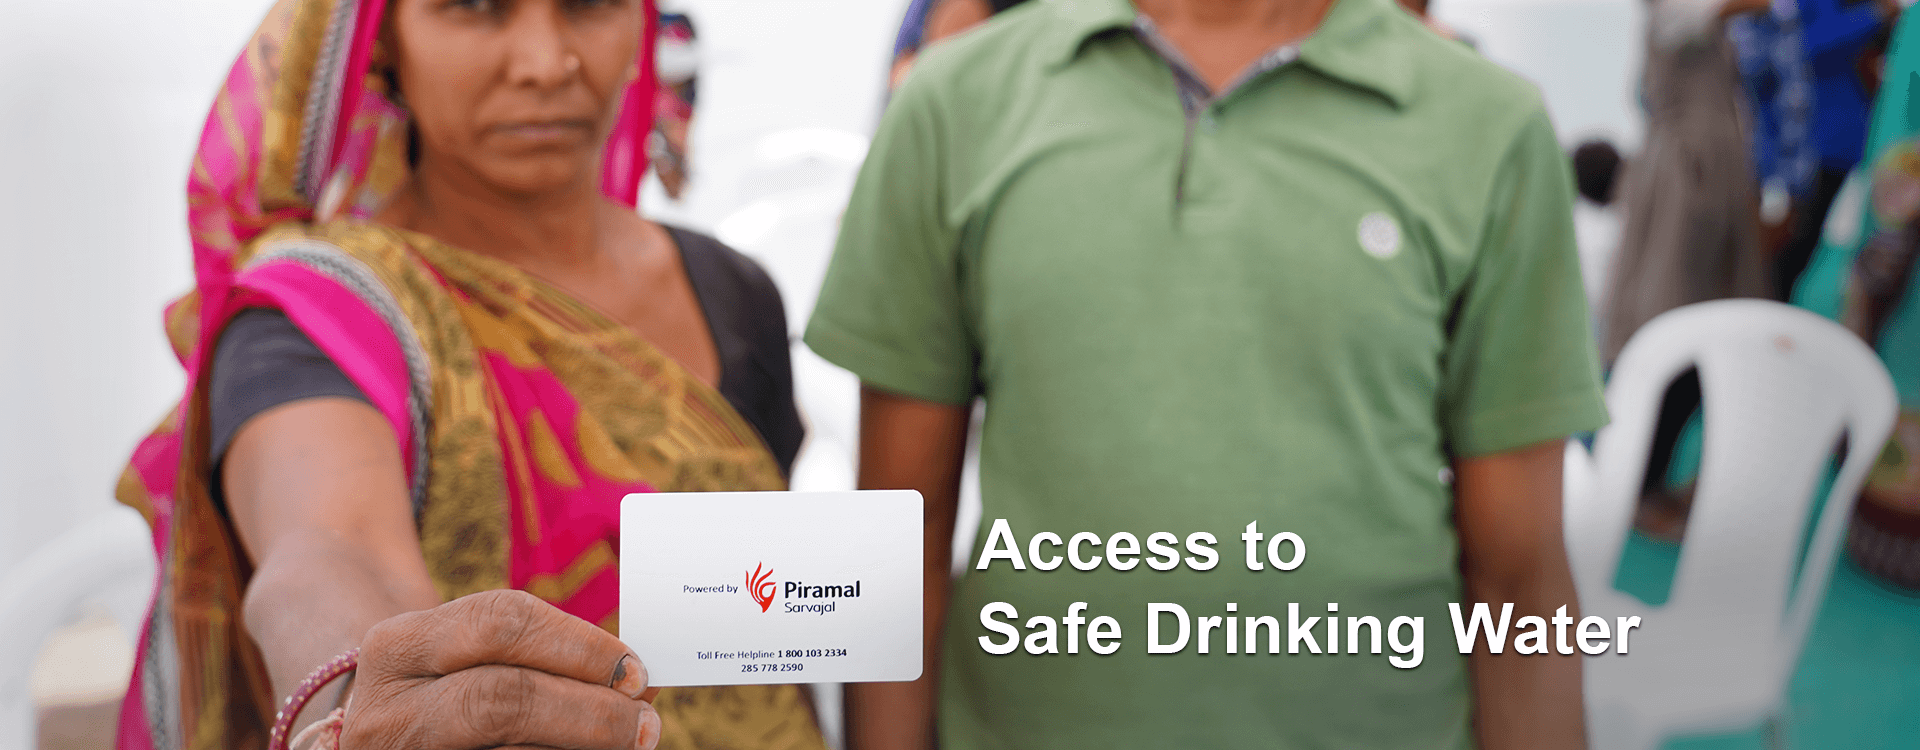 access-to-safe-drinking-water